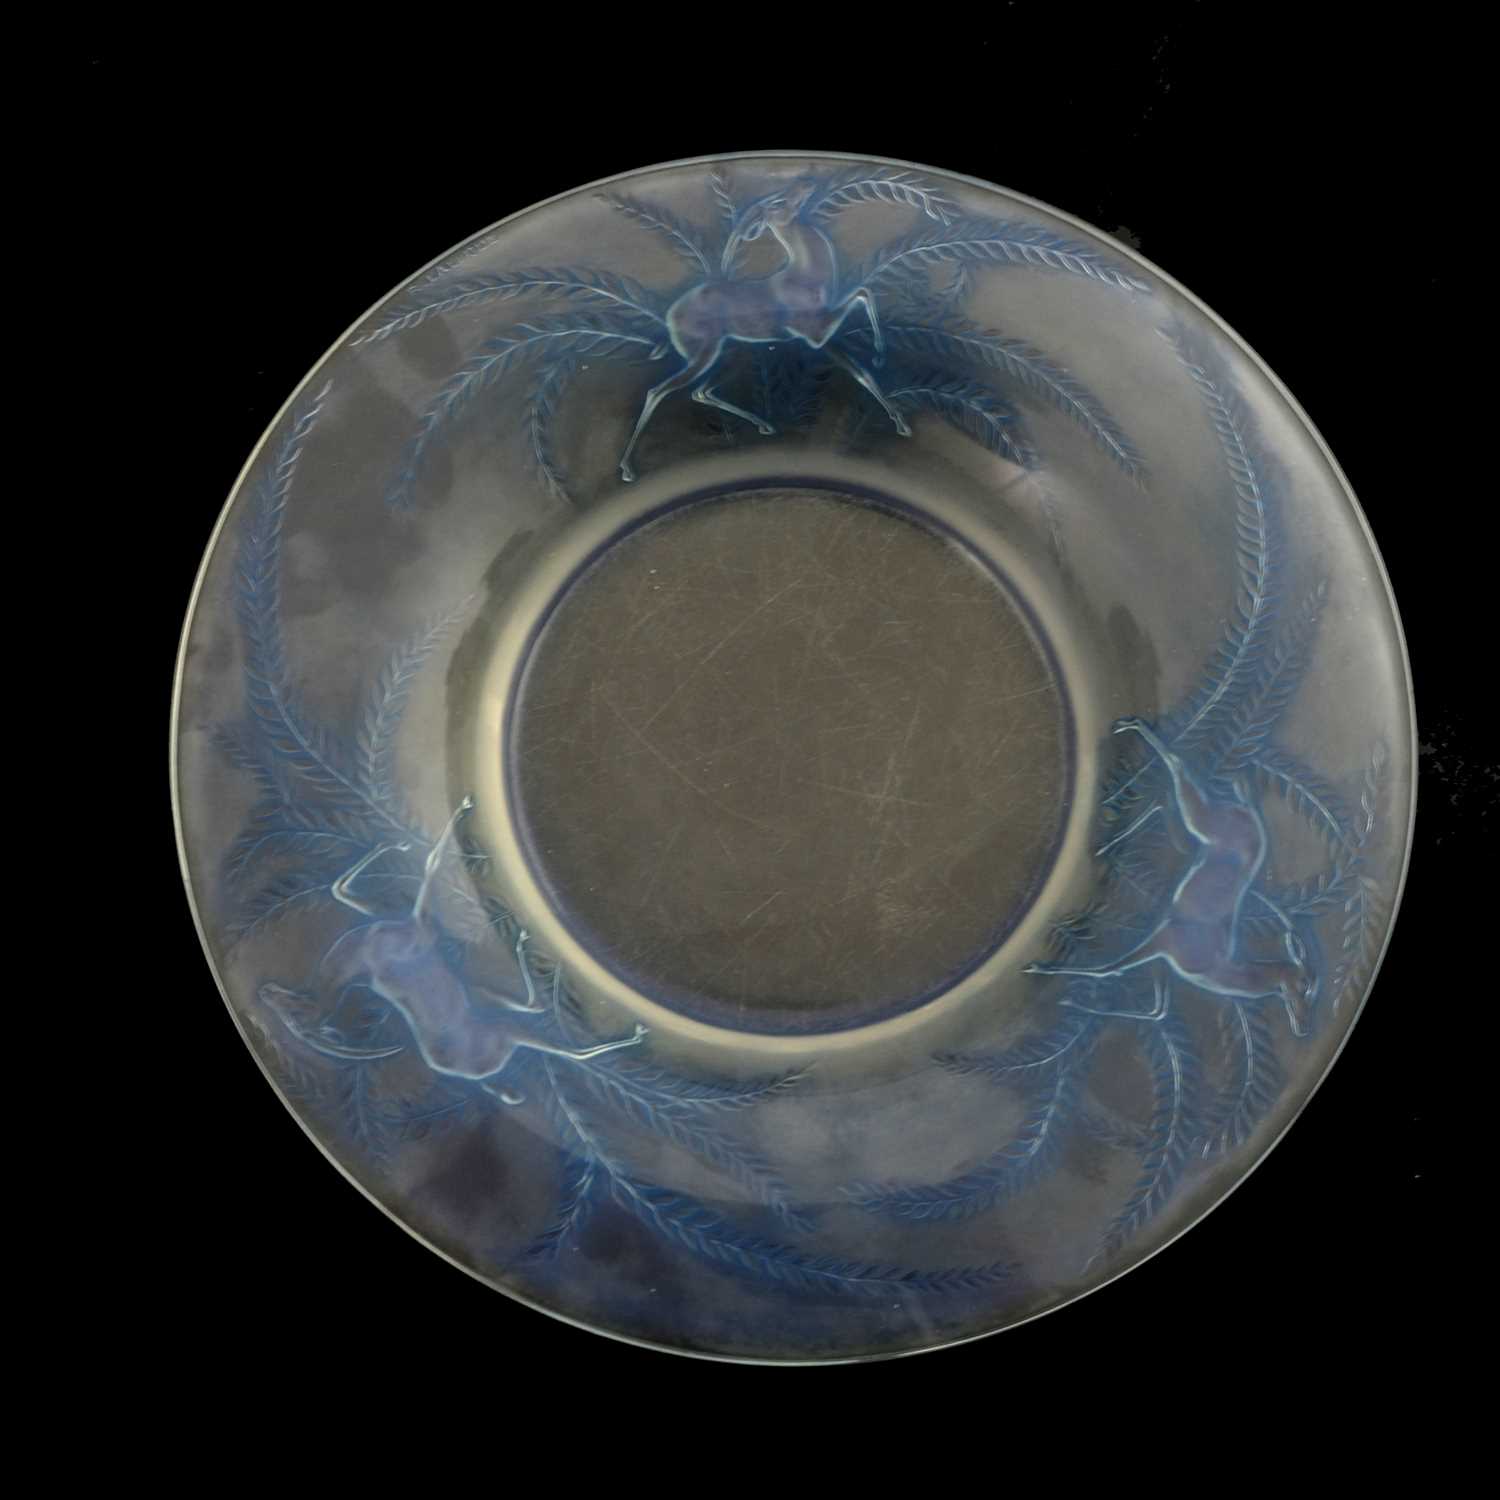 Rene Lalique, a Gazelles glass bowl, model 390, designed circa 1925, frosted and polished, relief